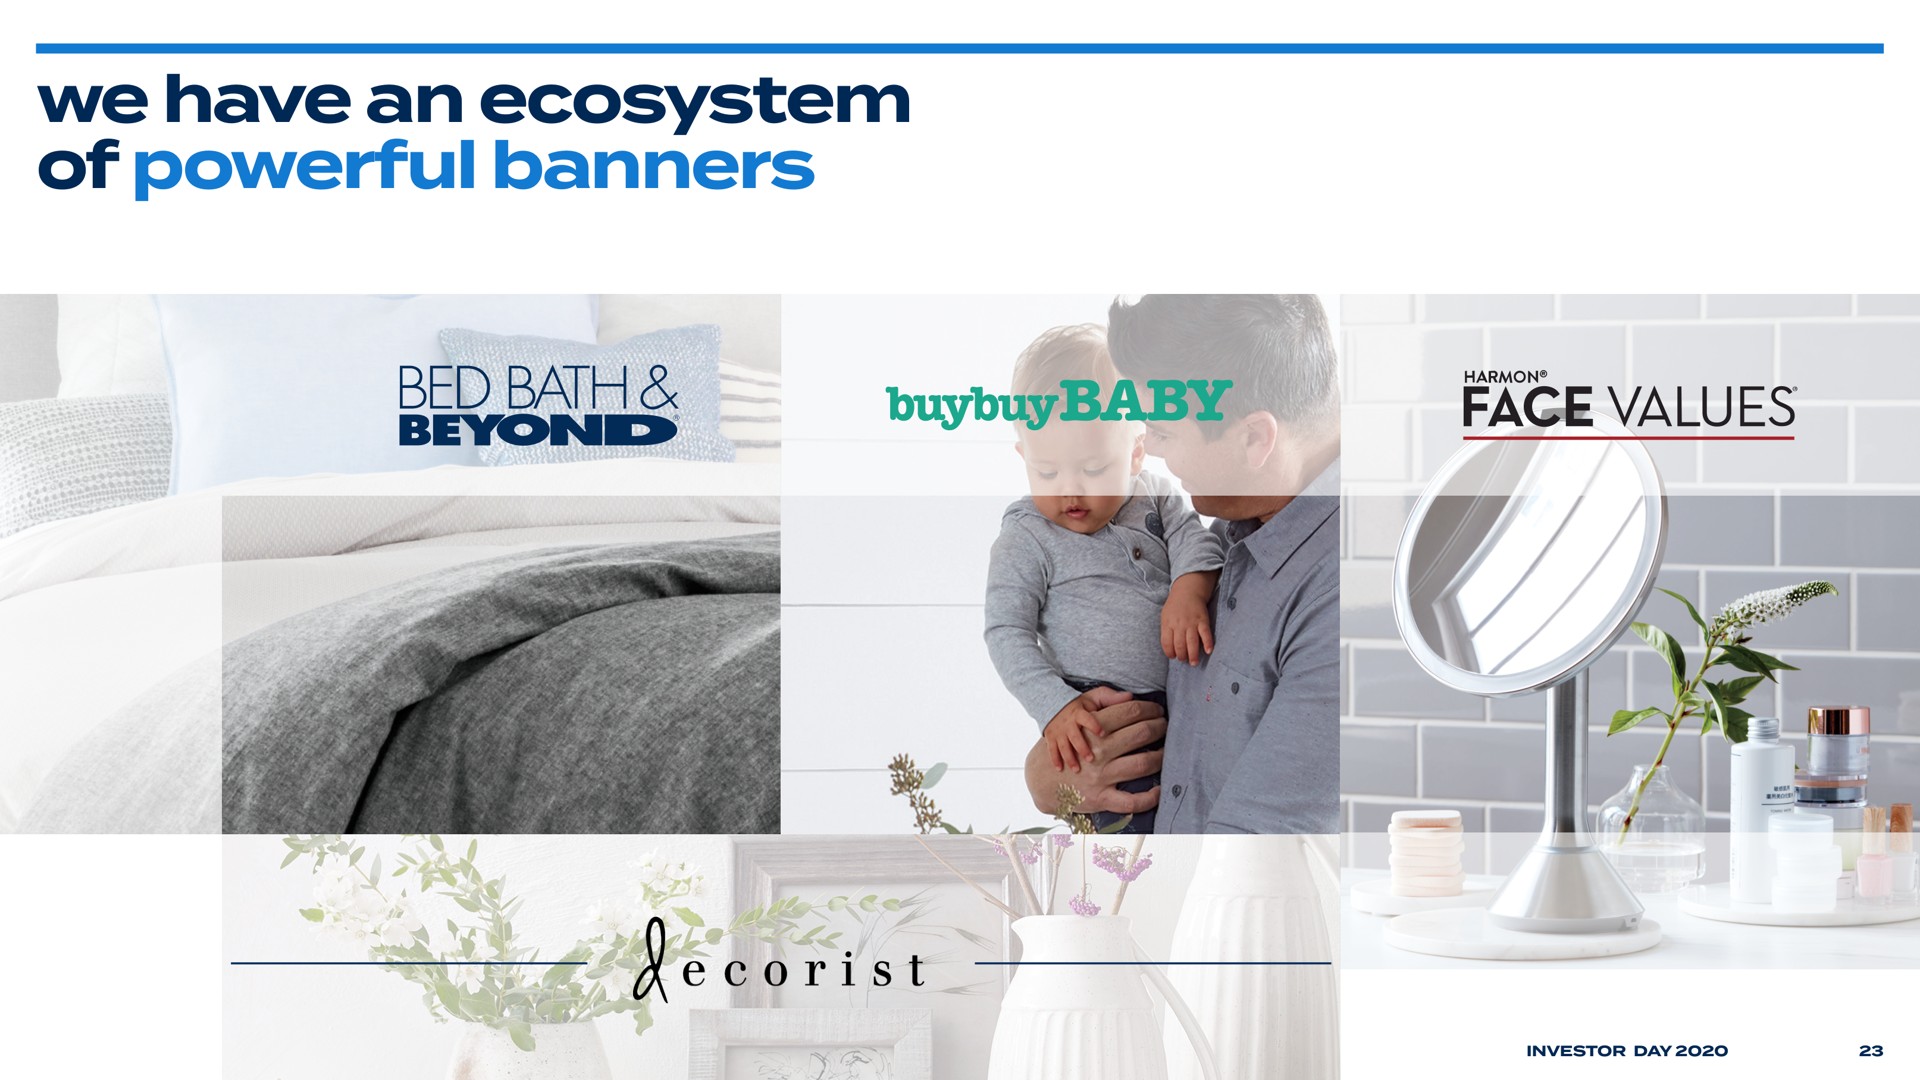 we have an ecosystem of powerful banners | Bed Bath & Beyond